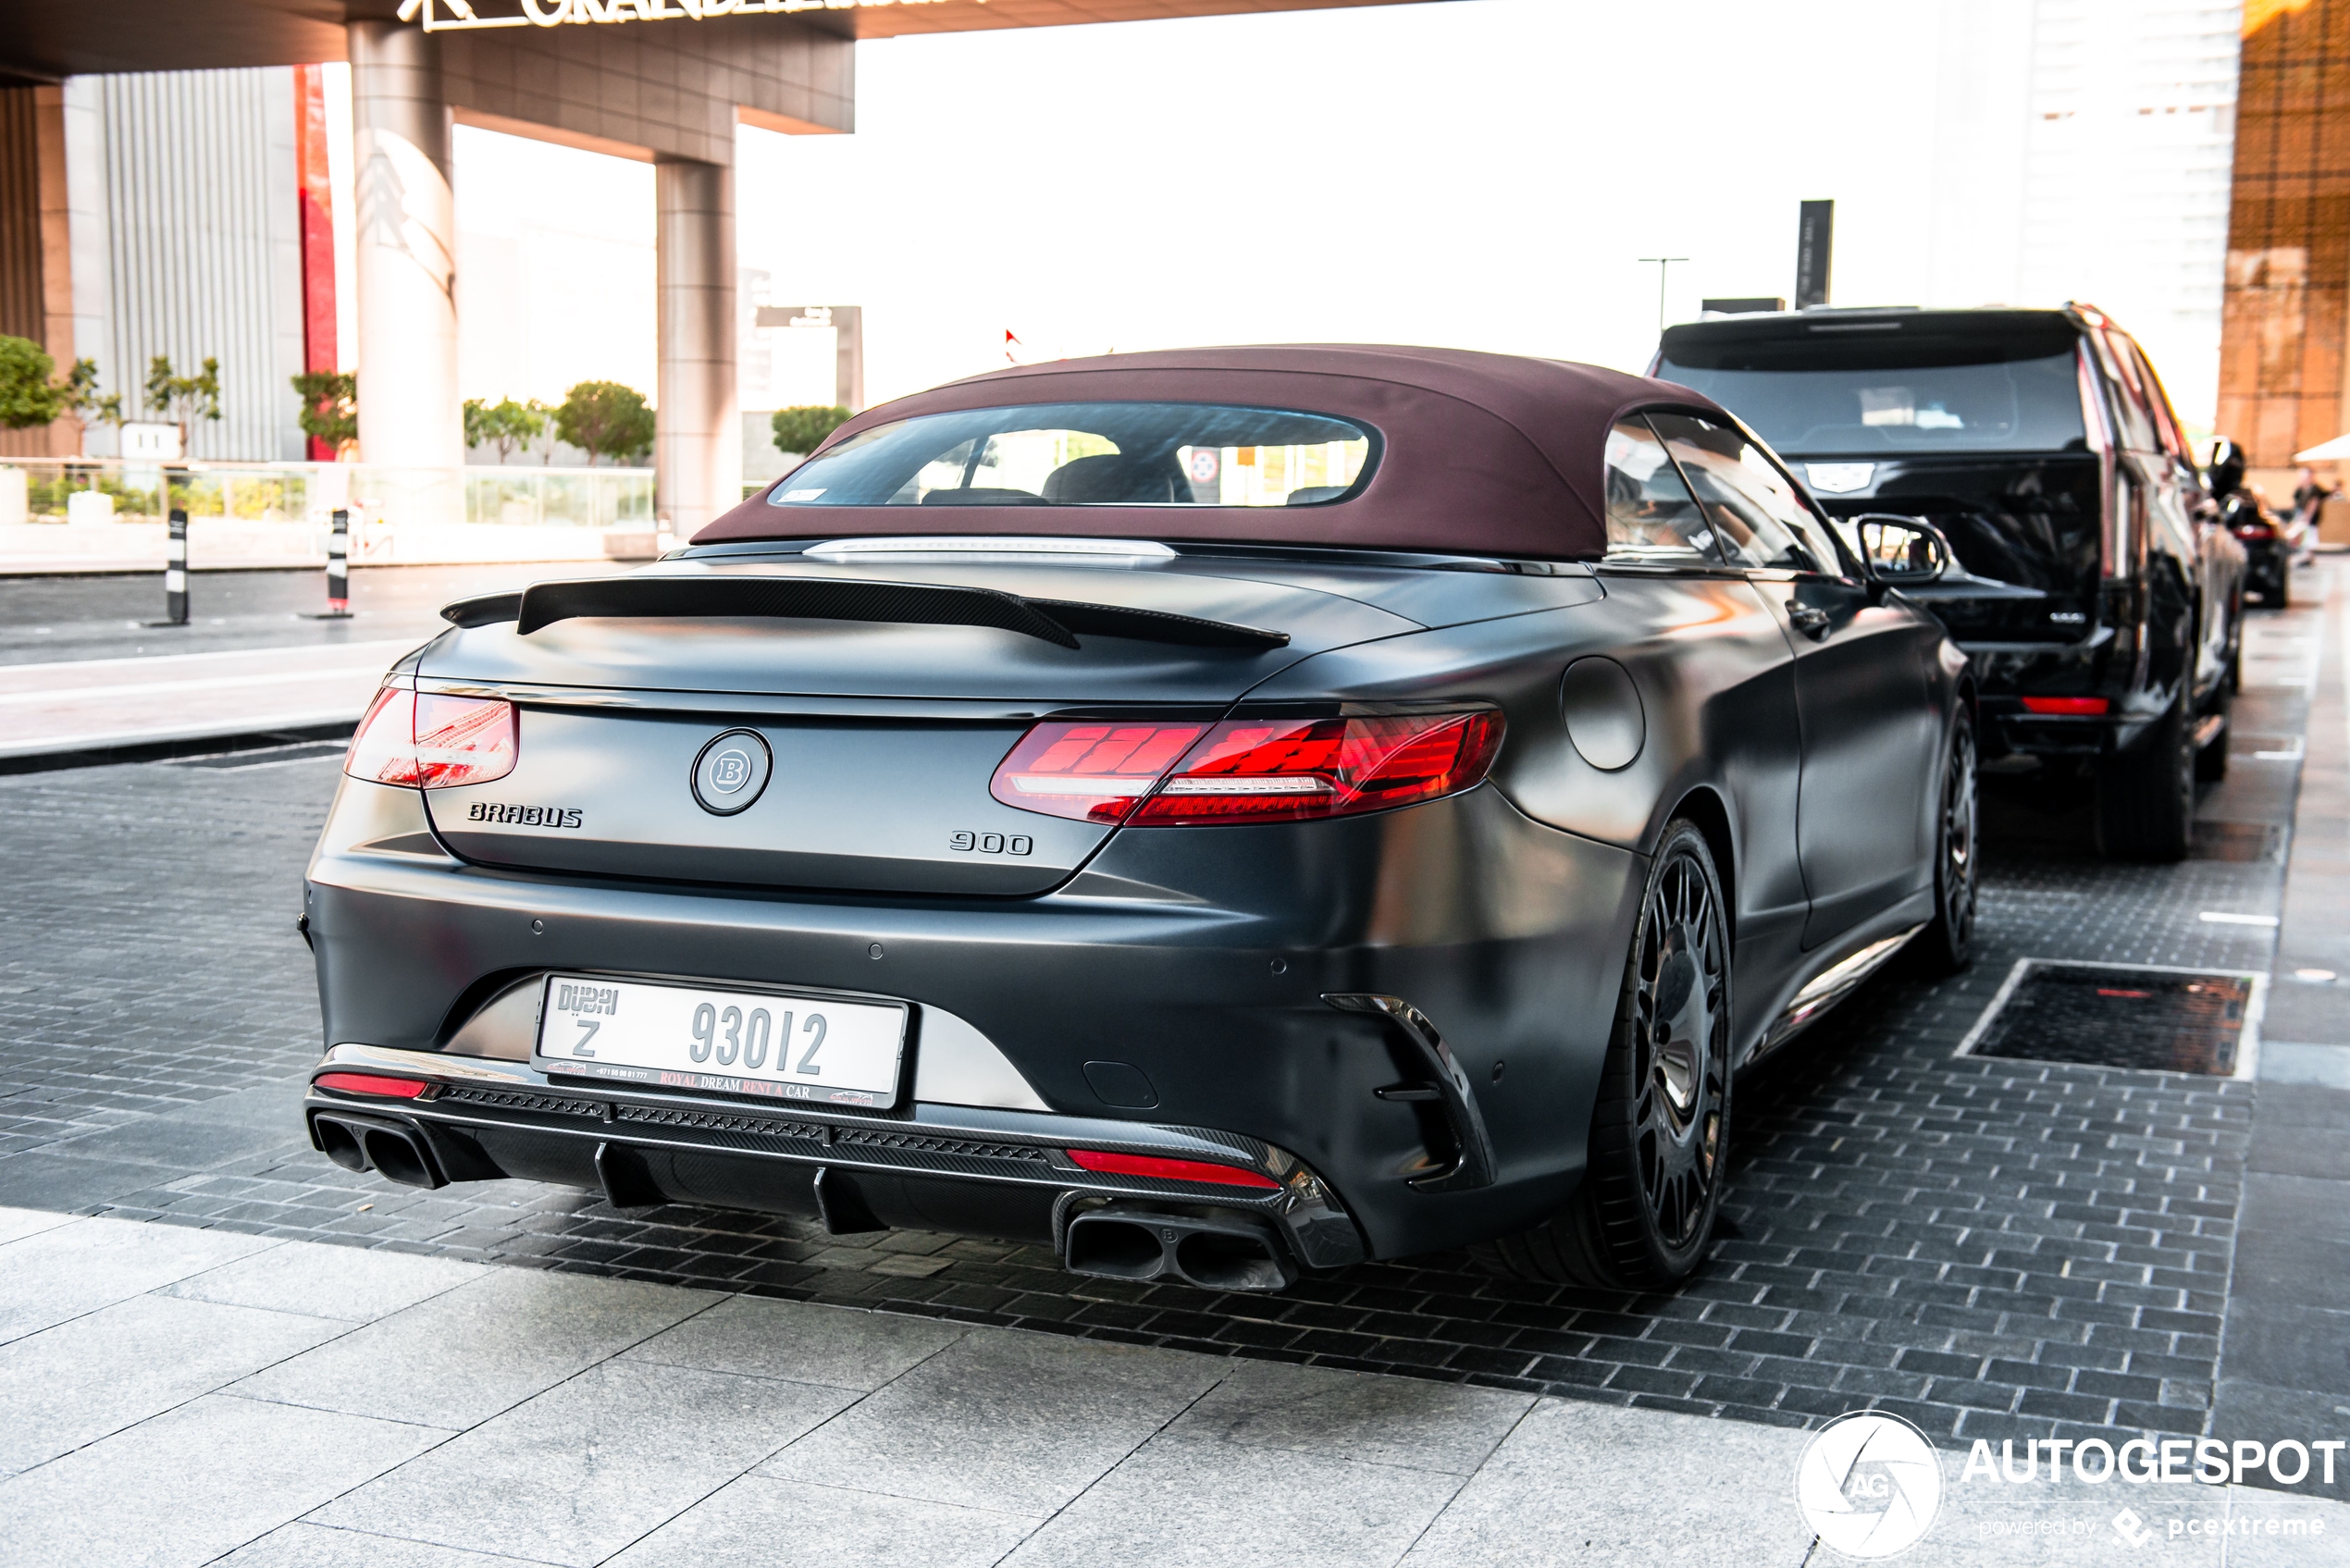 Mercedes-AMG Brabus S 900 Convertible A217 2018